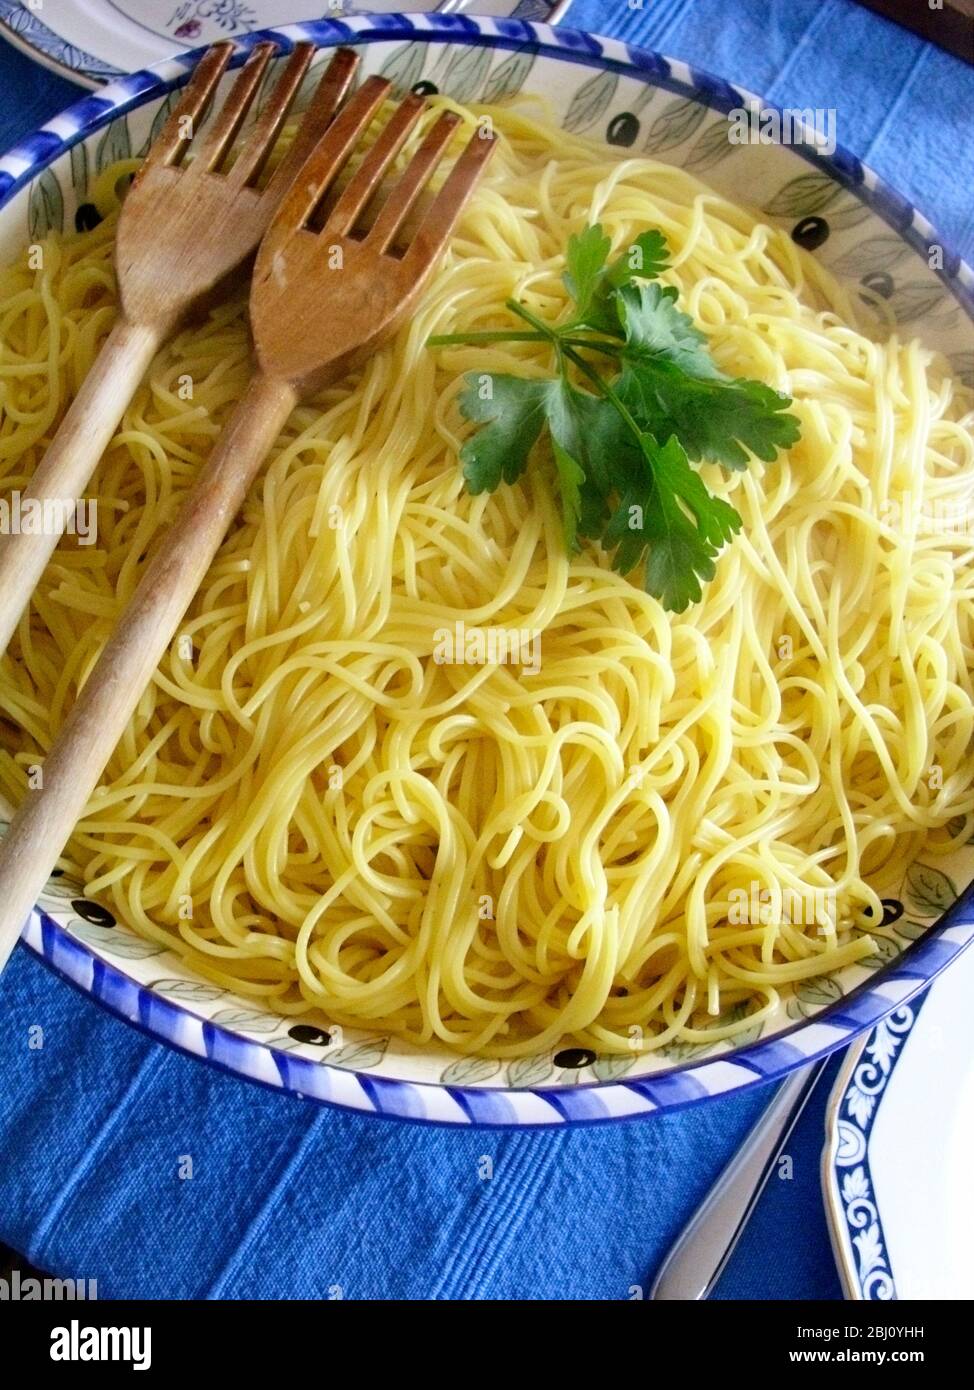 A large ceramic bowl of spaghetti garnished with flat parsley on blue cloth - Stock Photo